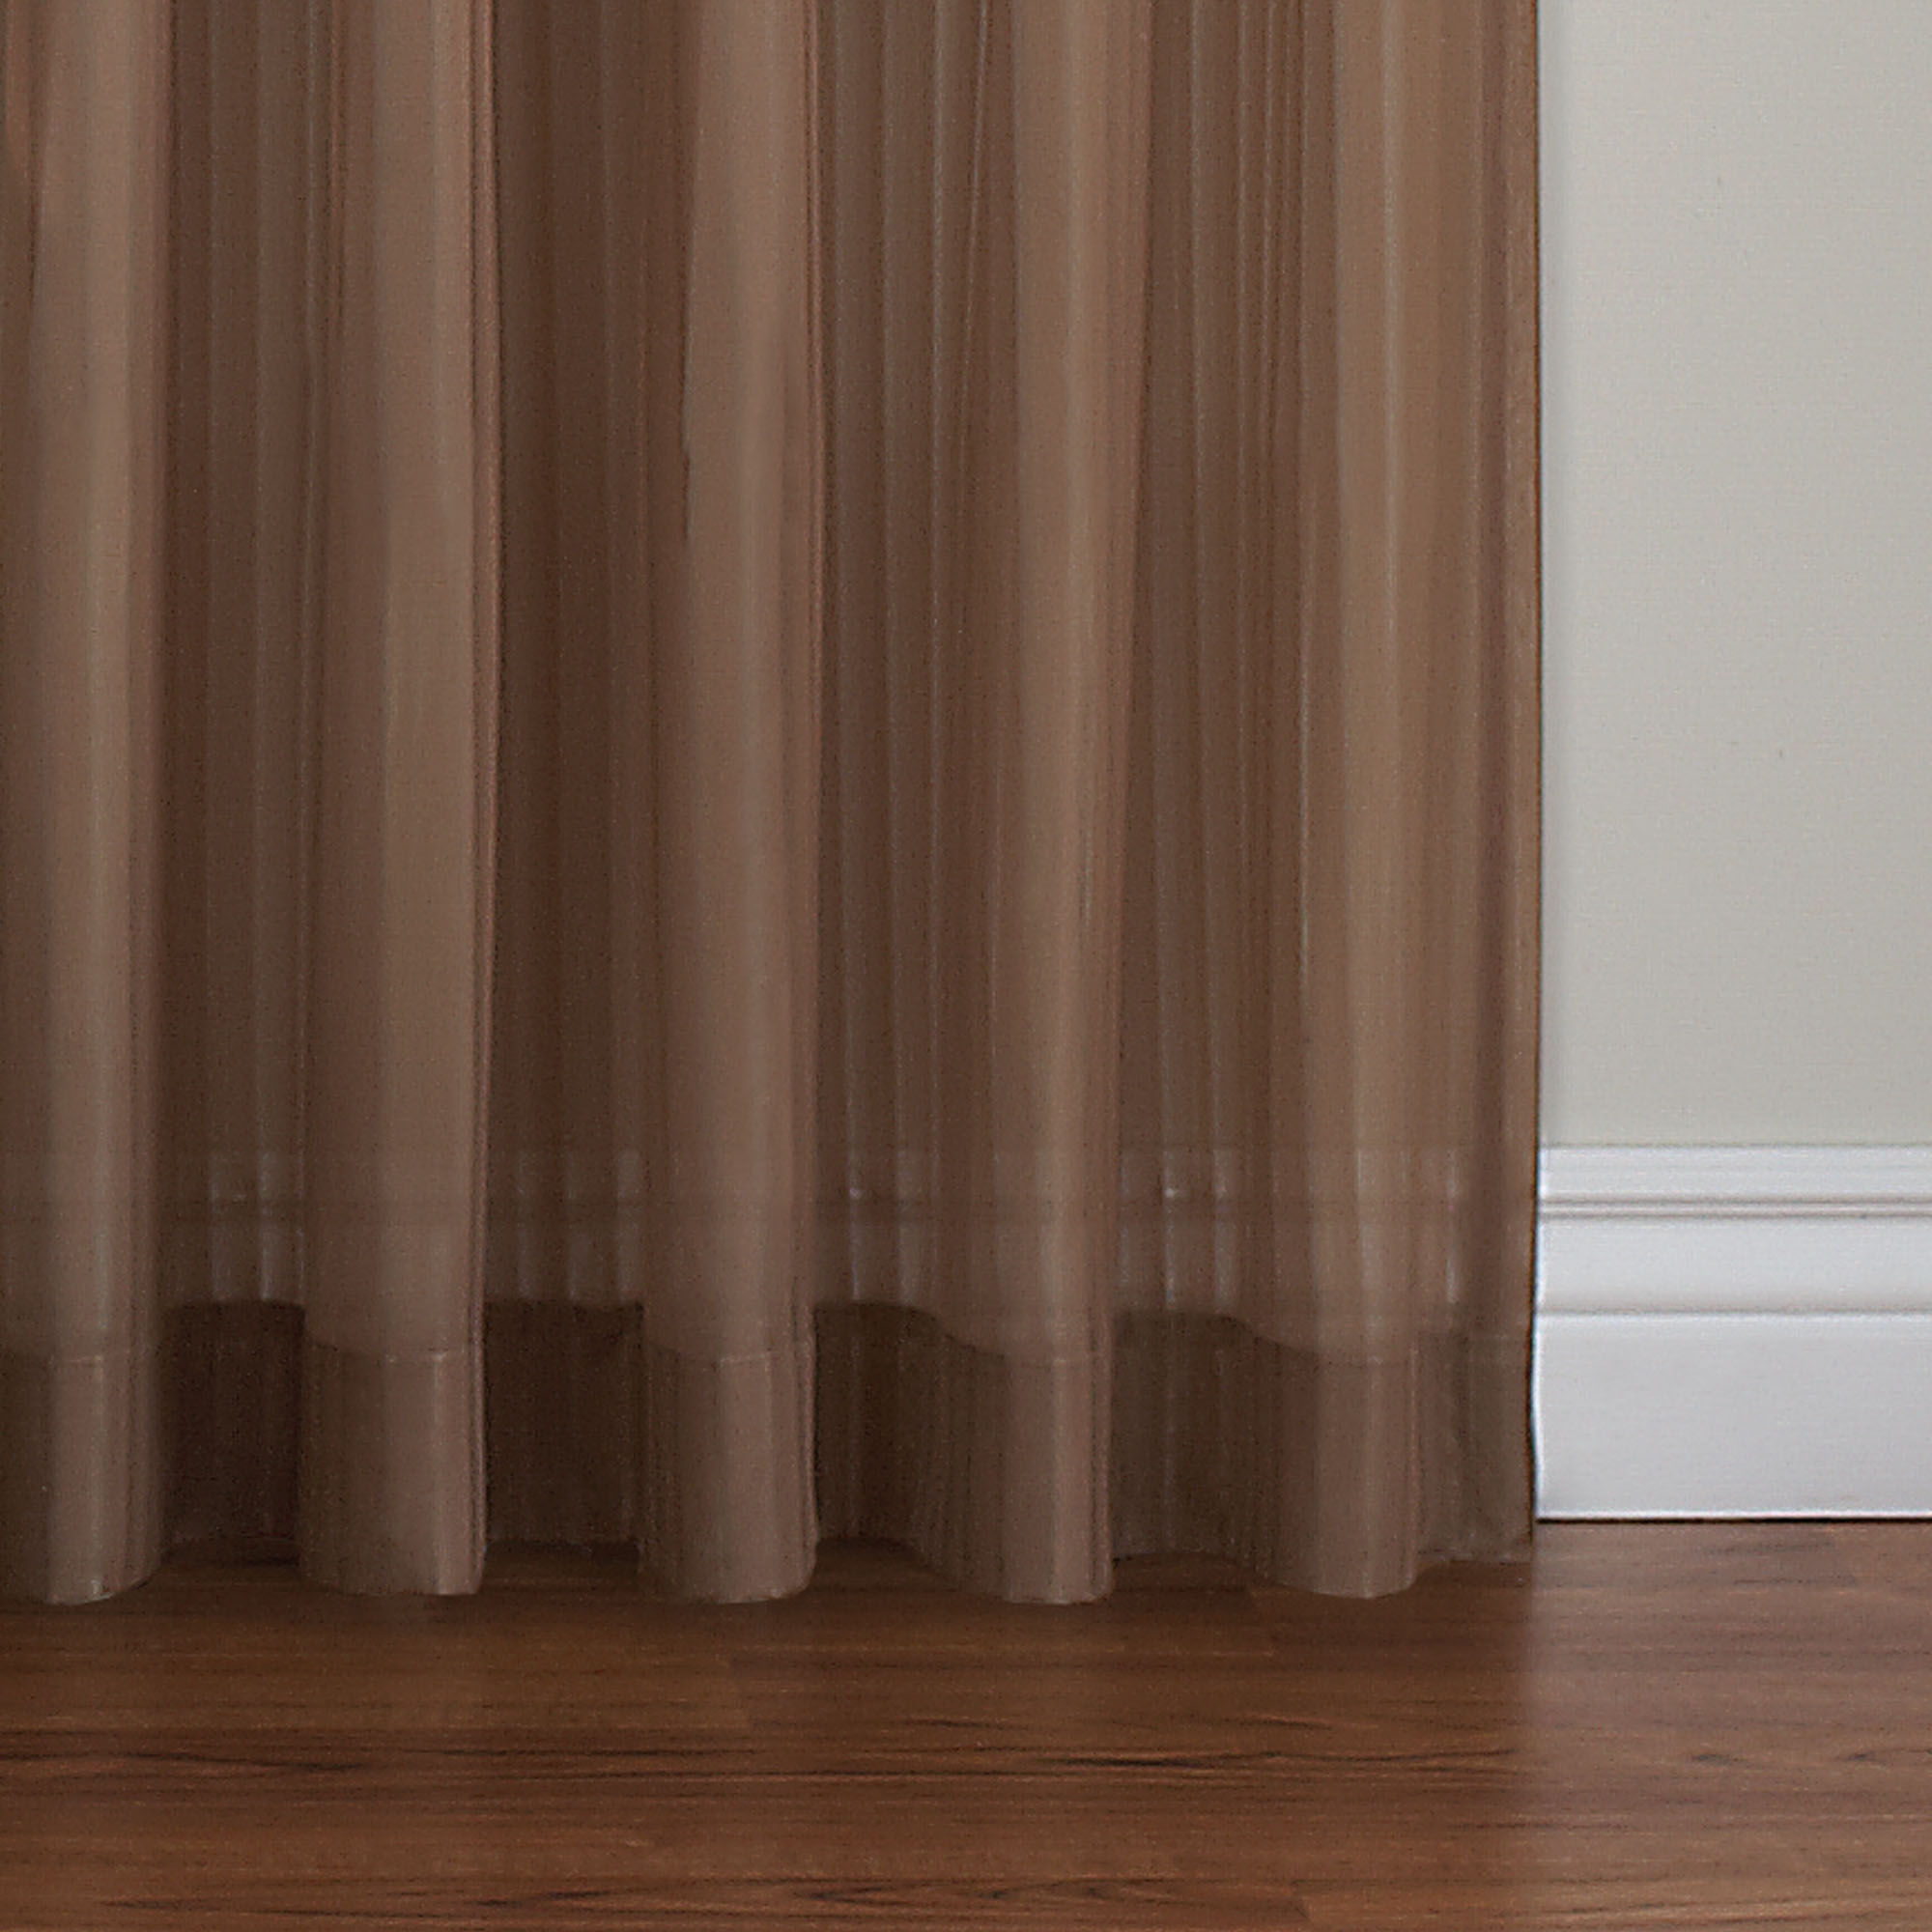 Better Homes & Gardens Vertical Stripe Rod Pocket Sheer Curtain Panel, 52" x 84", Beige/Clay - image 5 of 5